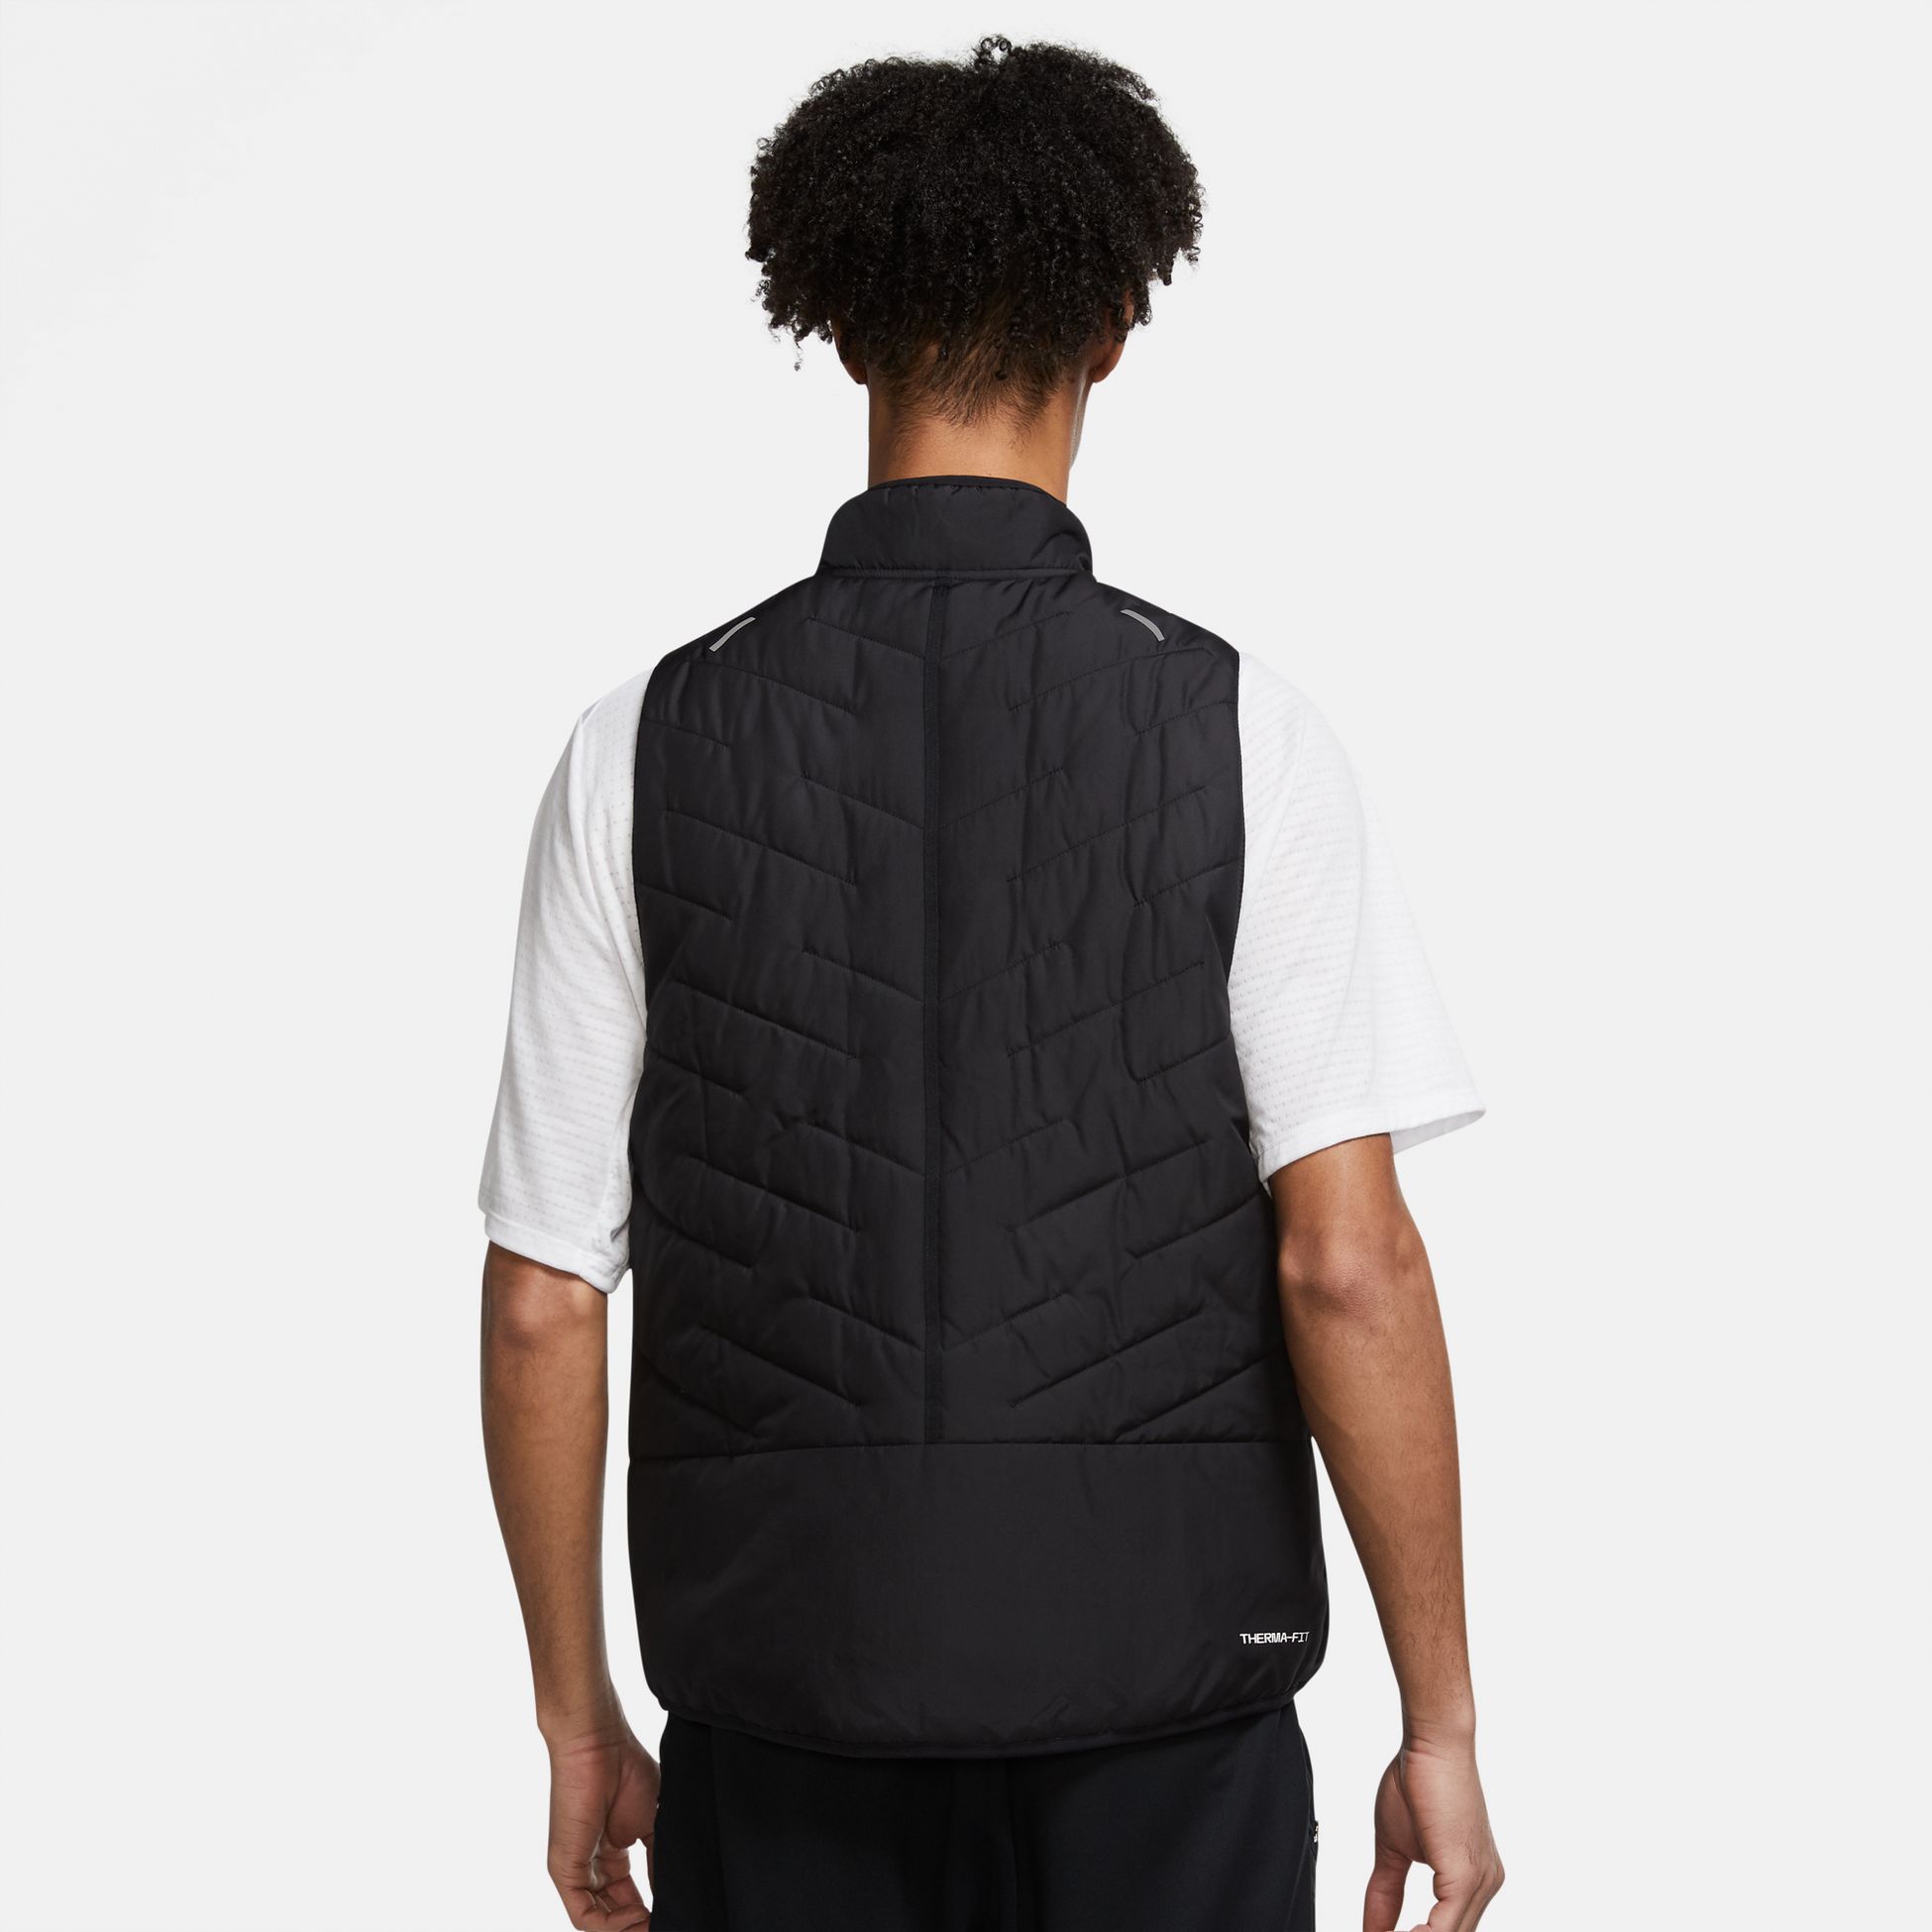 NIKE, M NK THERMA-FIT REPEL VEST